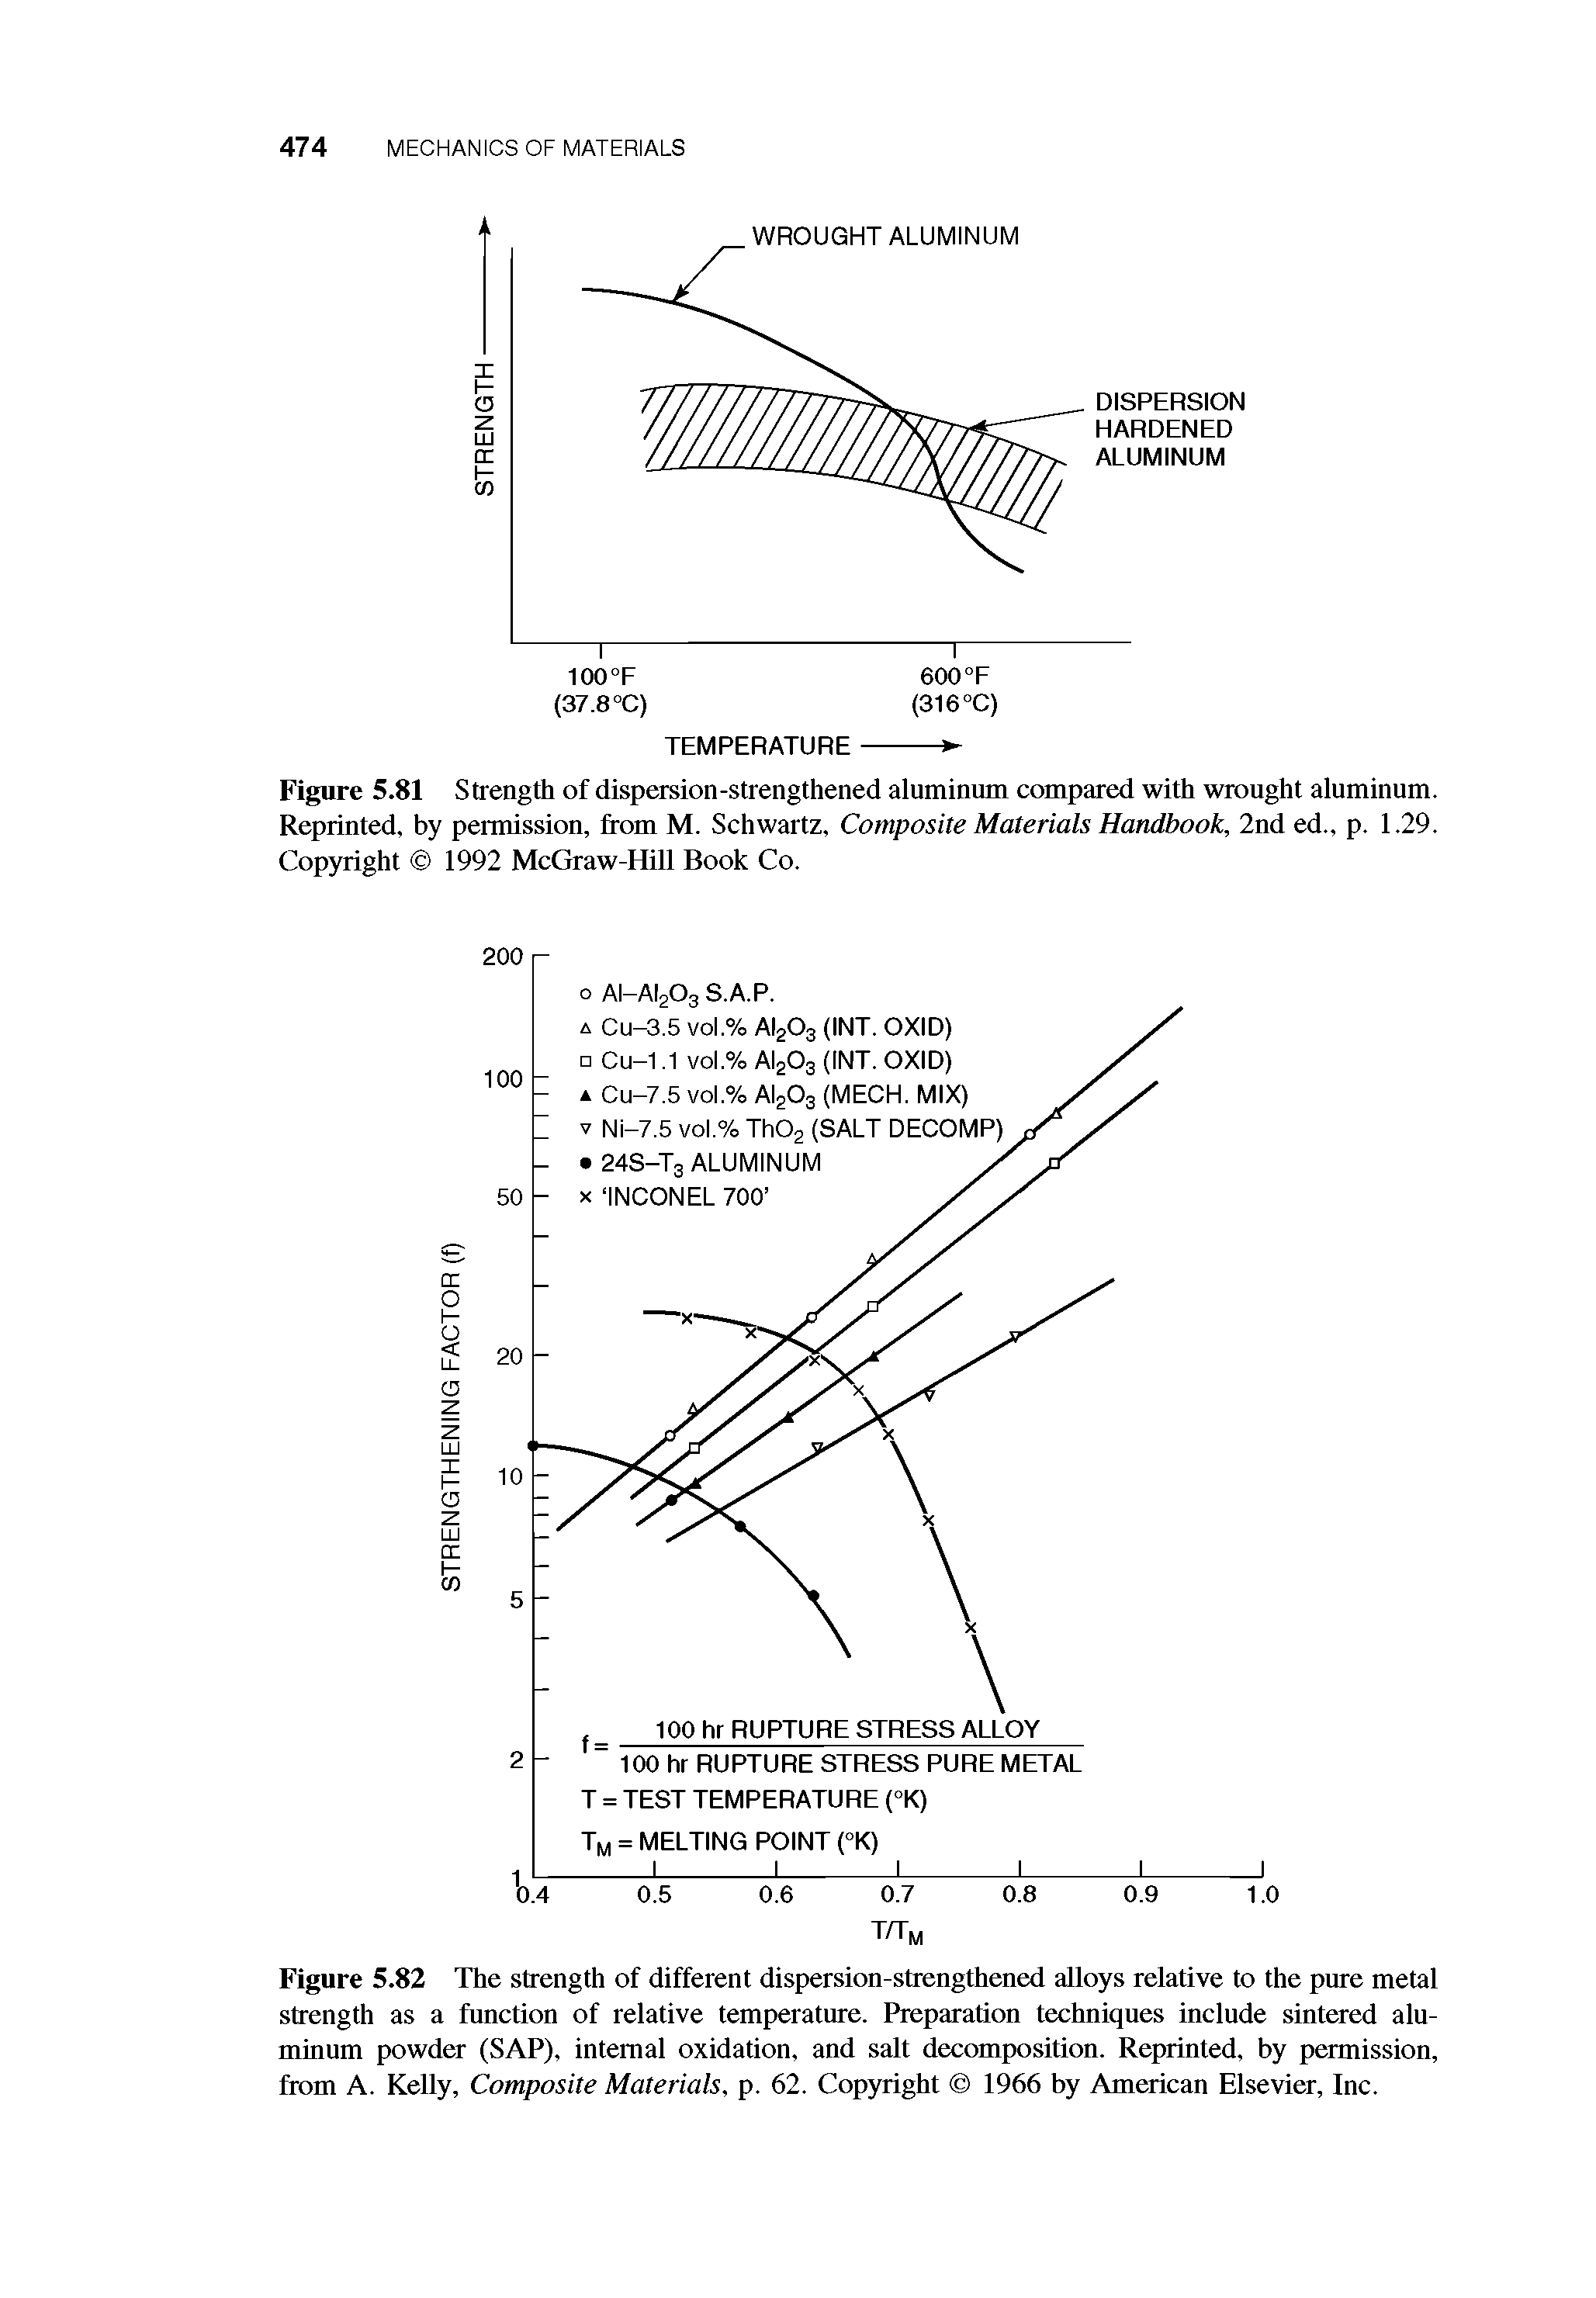 Figure 5.82 The strength of different dispersion-strengthened alloys relative to the pure metal strength as a function of relative temperature. Preparation techniques include sintered aluminum powder (SAP), internal oxidation, and salt decomposition. Reprinted, by permission, from A. Kelly, Composite Materials, p. 62. Copyright 1966 by American Elsevier, Inc.